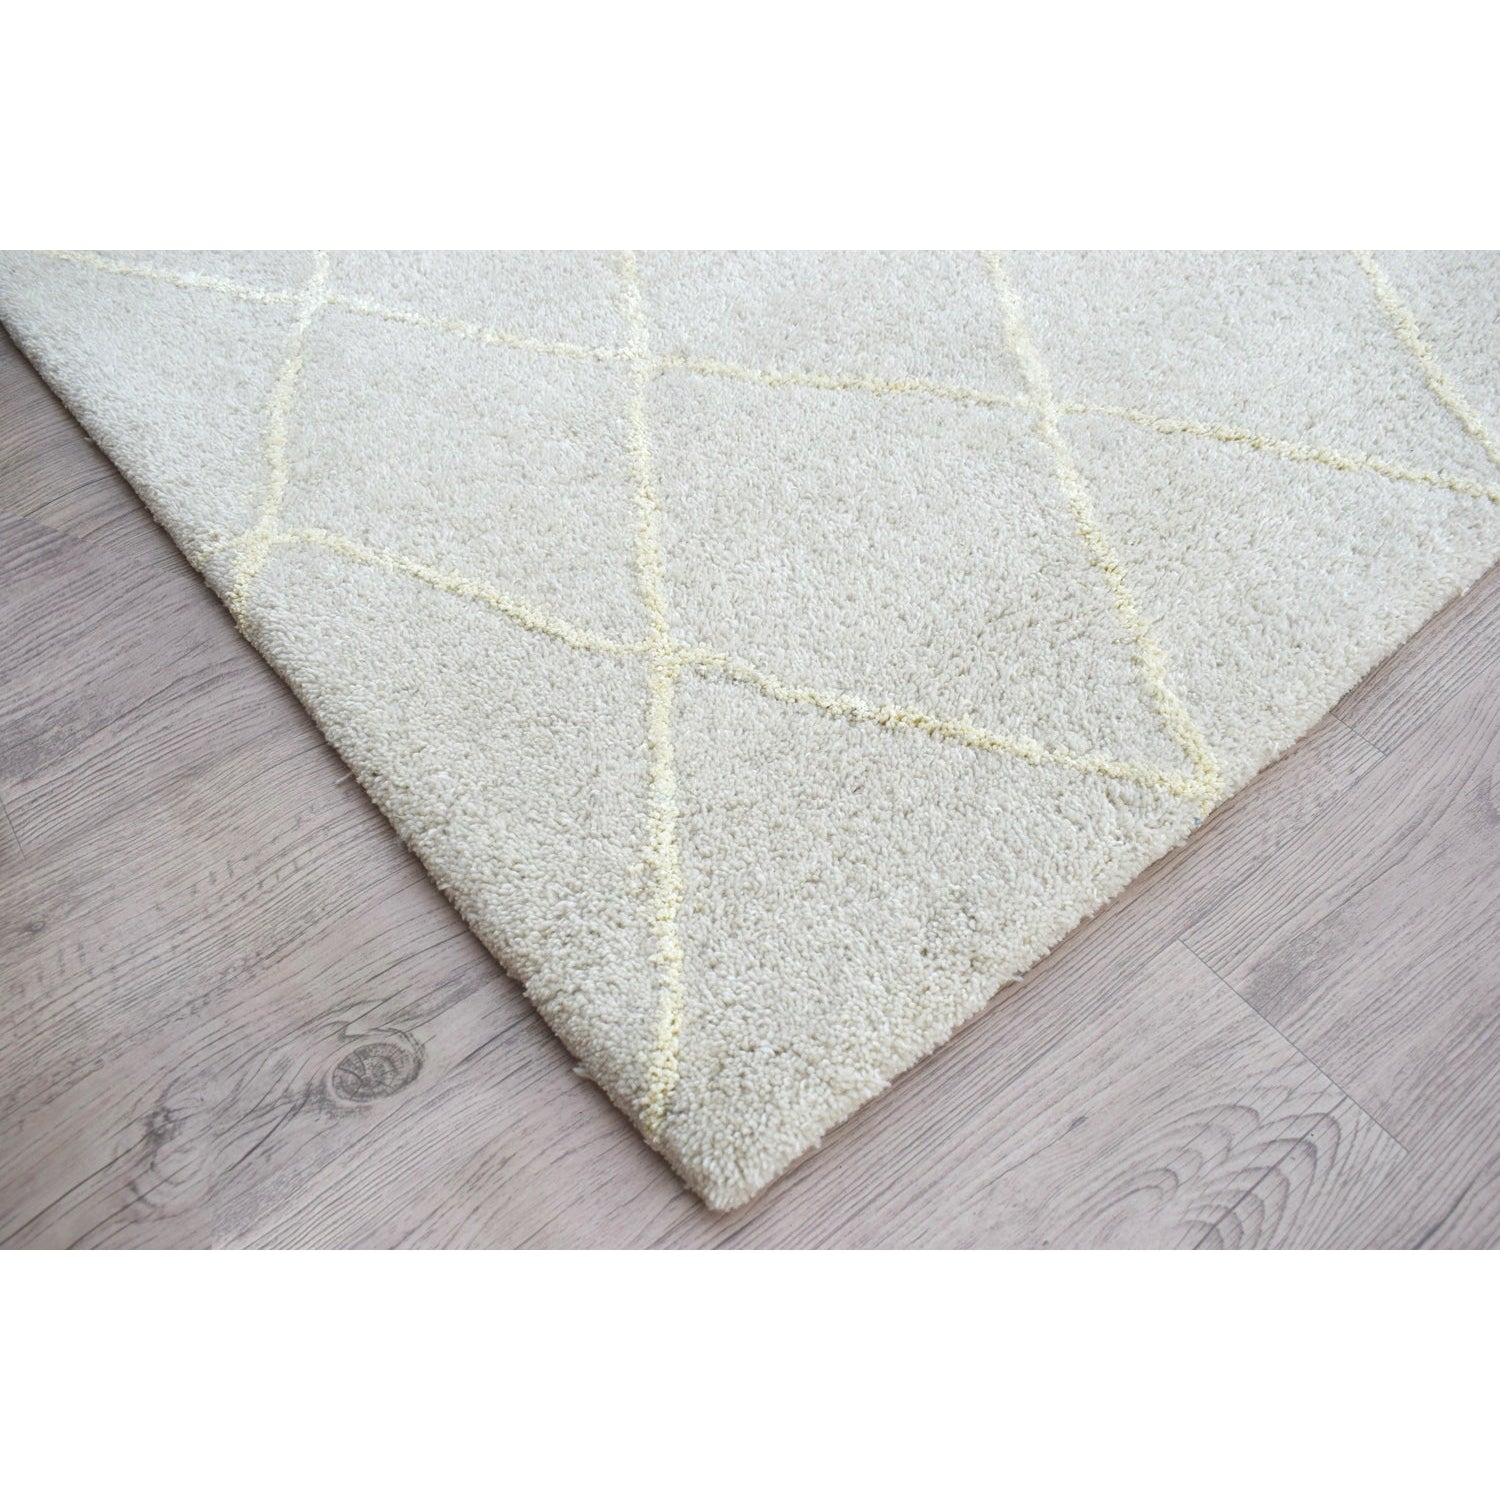 Rugs by Roo | Organic Weave Moroccan Rebel Hope Shag Taupe Area Rug-OW-REBHOT-0508